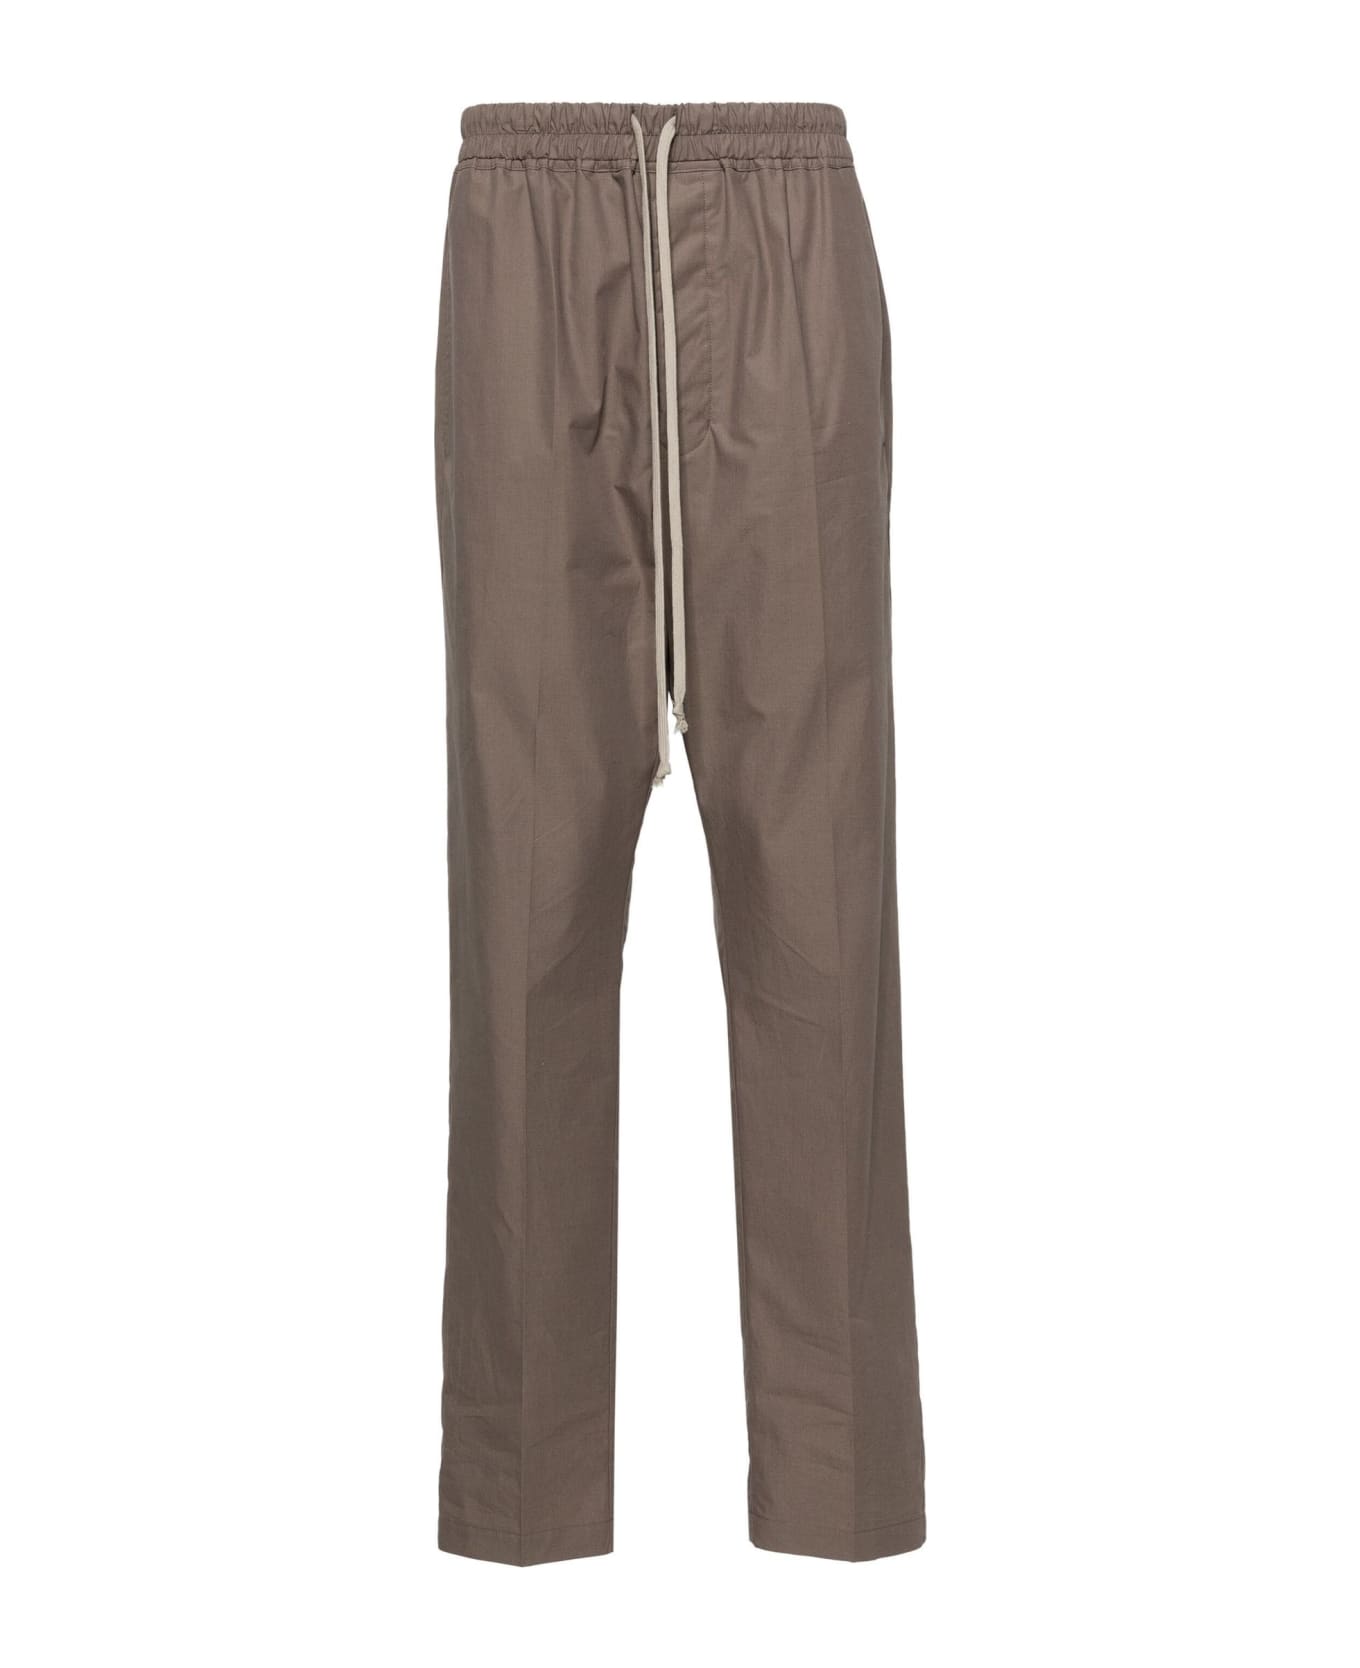 Rick Owens Trousers Brown - Brown ボトムス